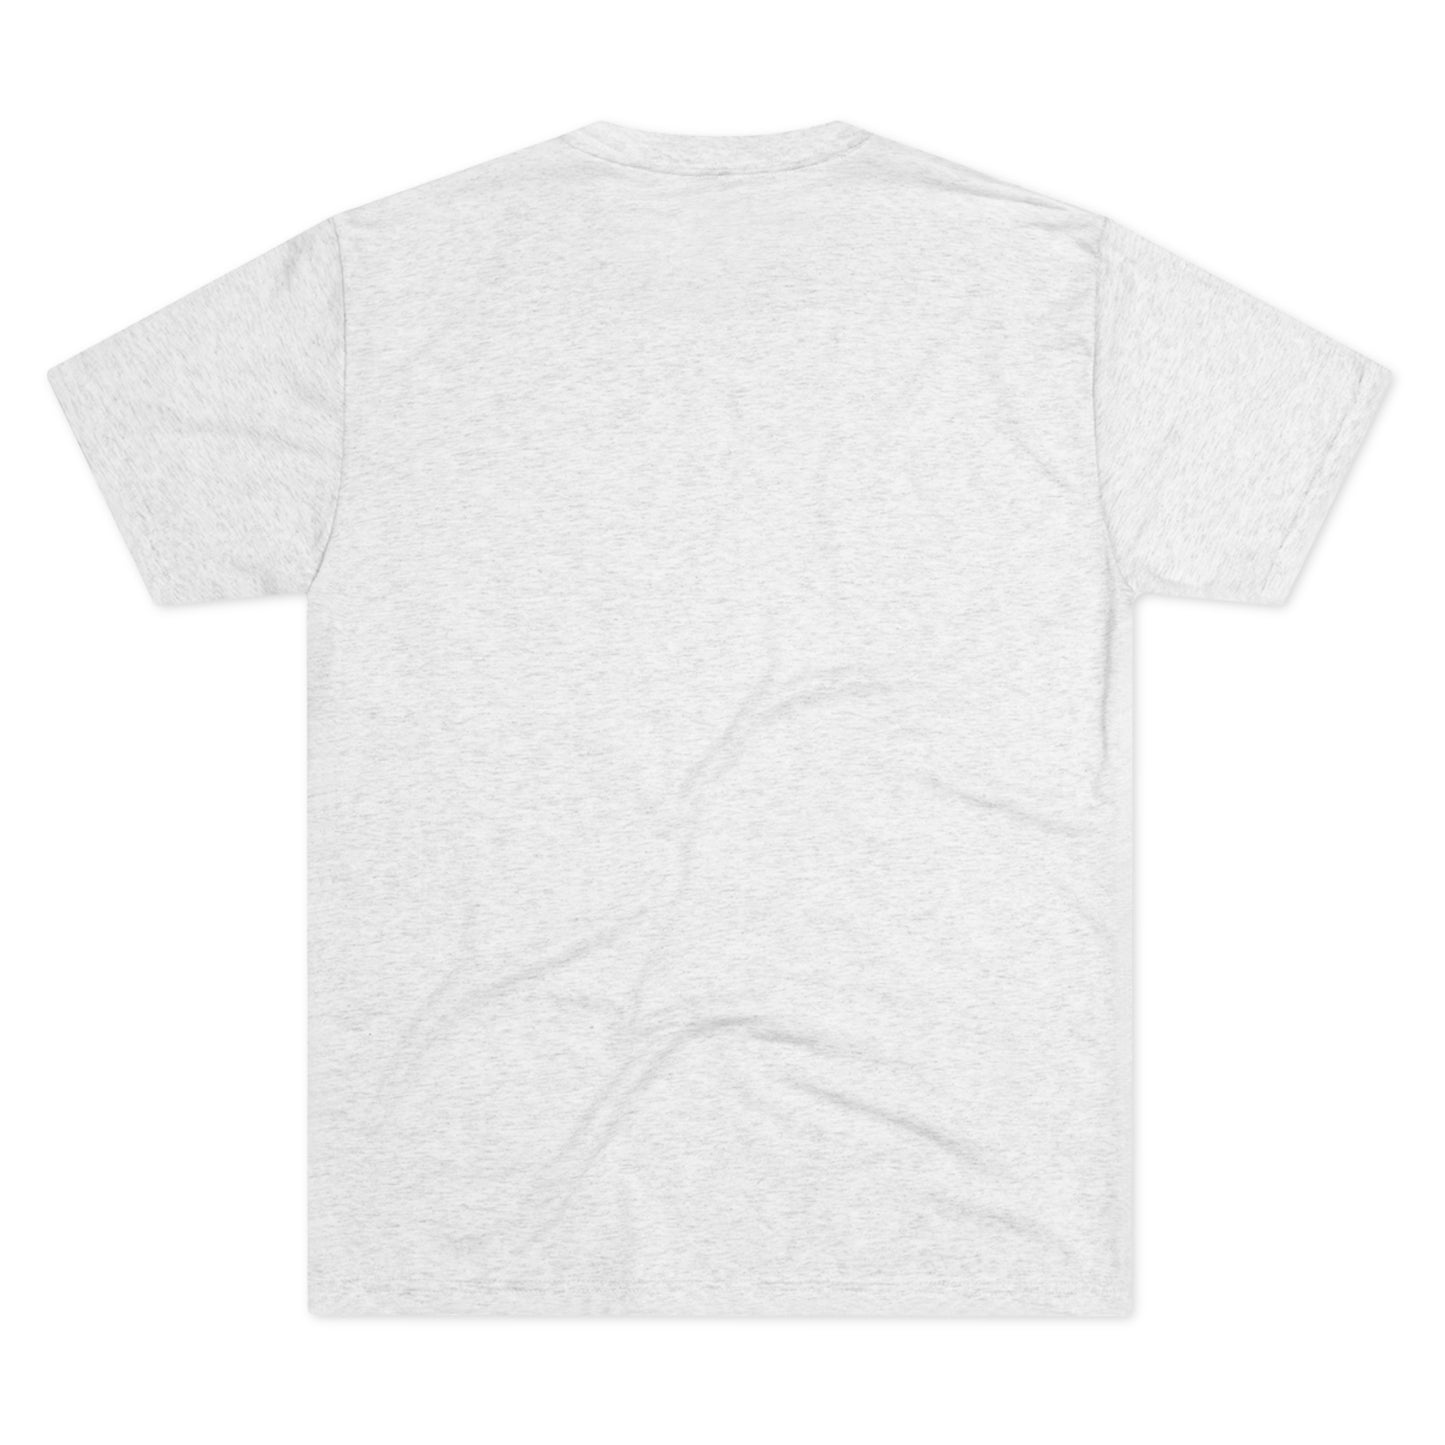 I Wanna Get Lost (In a Book) Tri-Blend Crew Tee